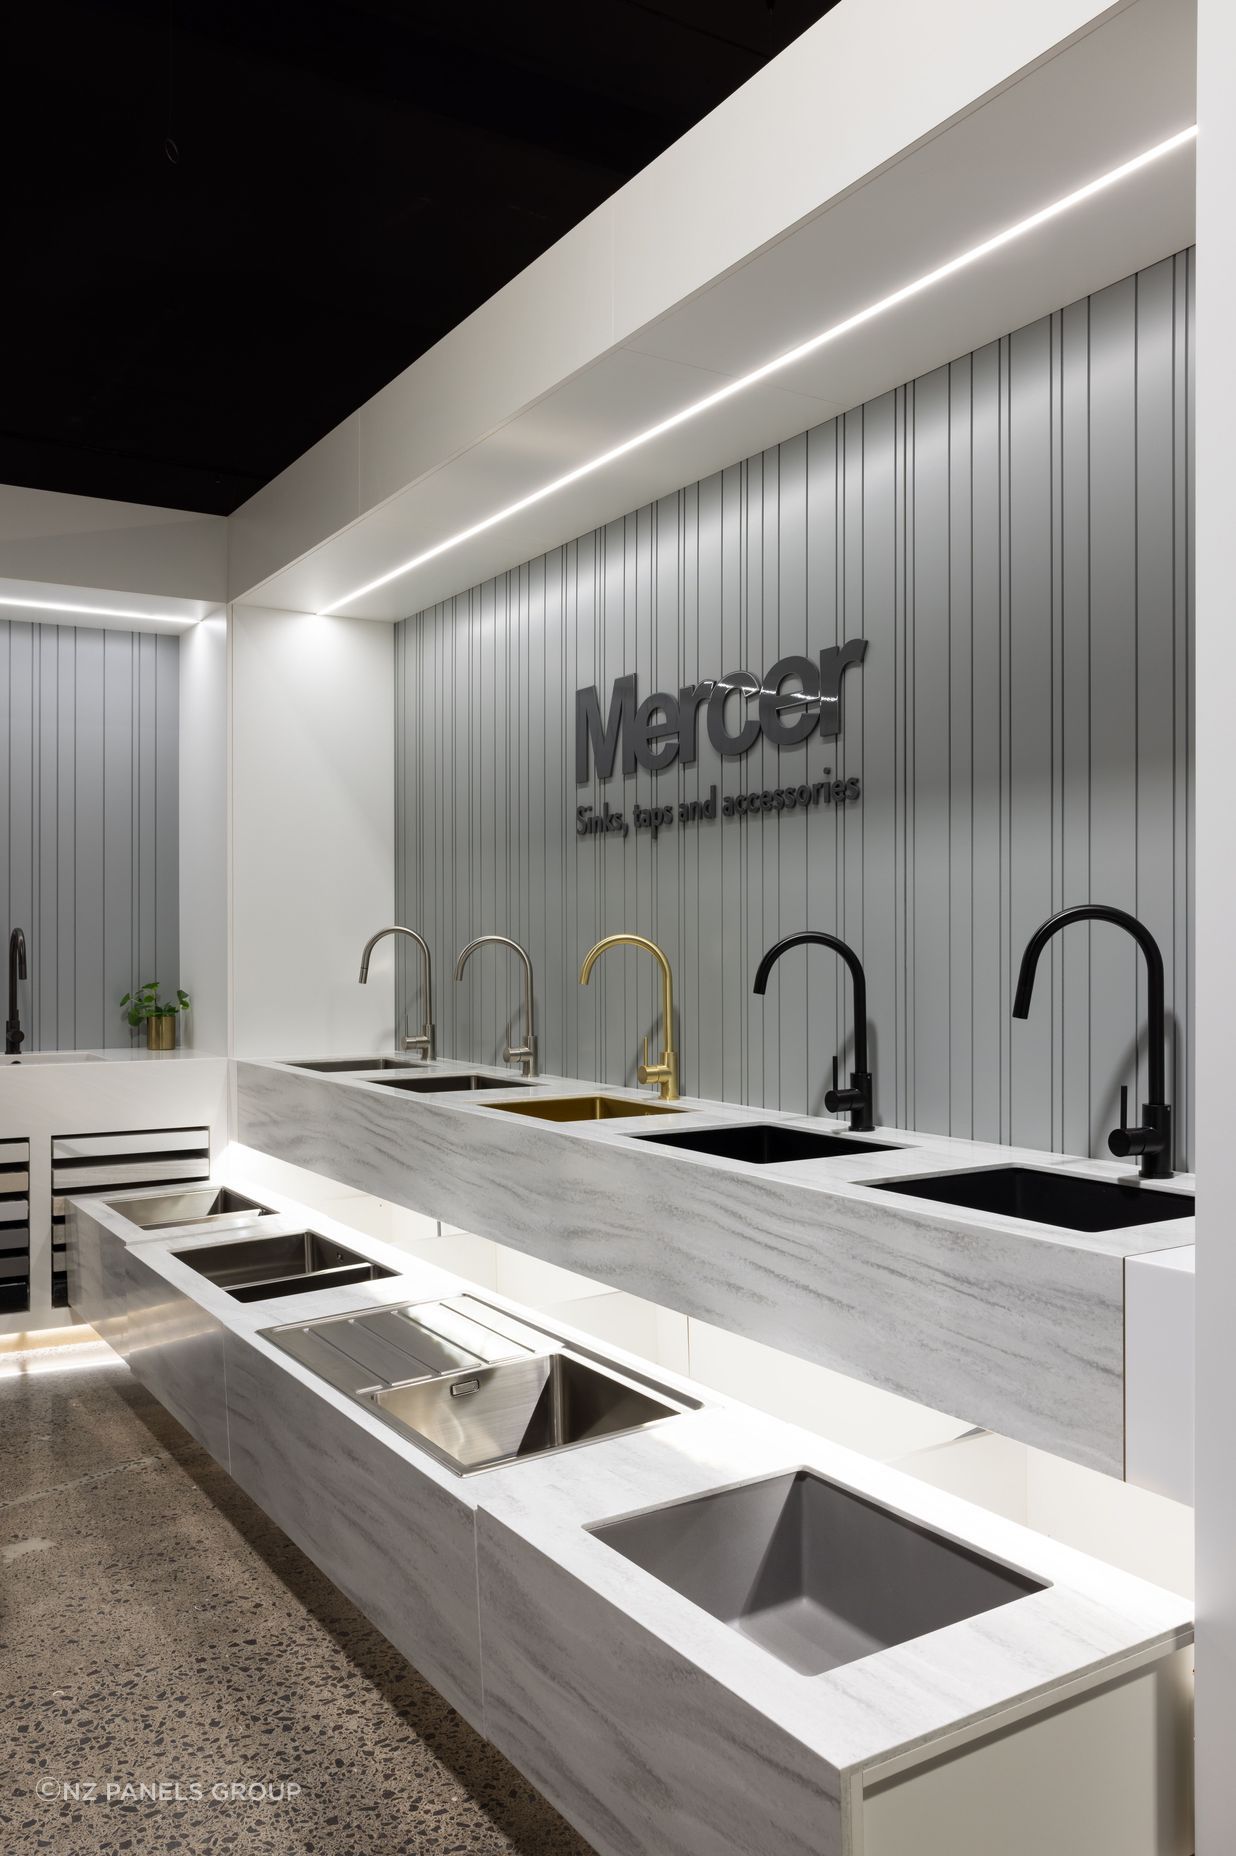 Visitors can explore a range of popular and new Mercer sinks, with more to see in the pull out draws below.